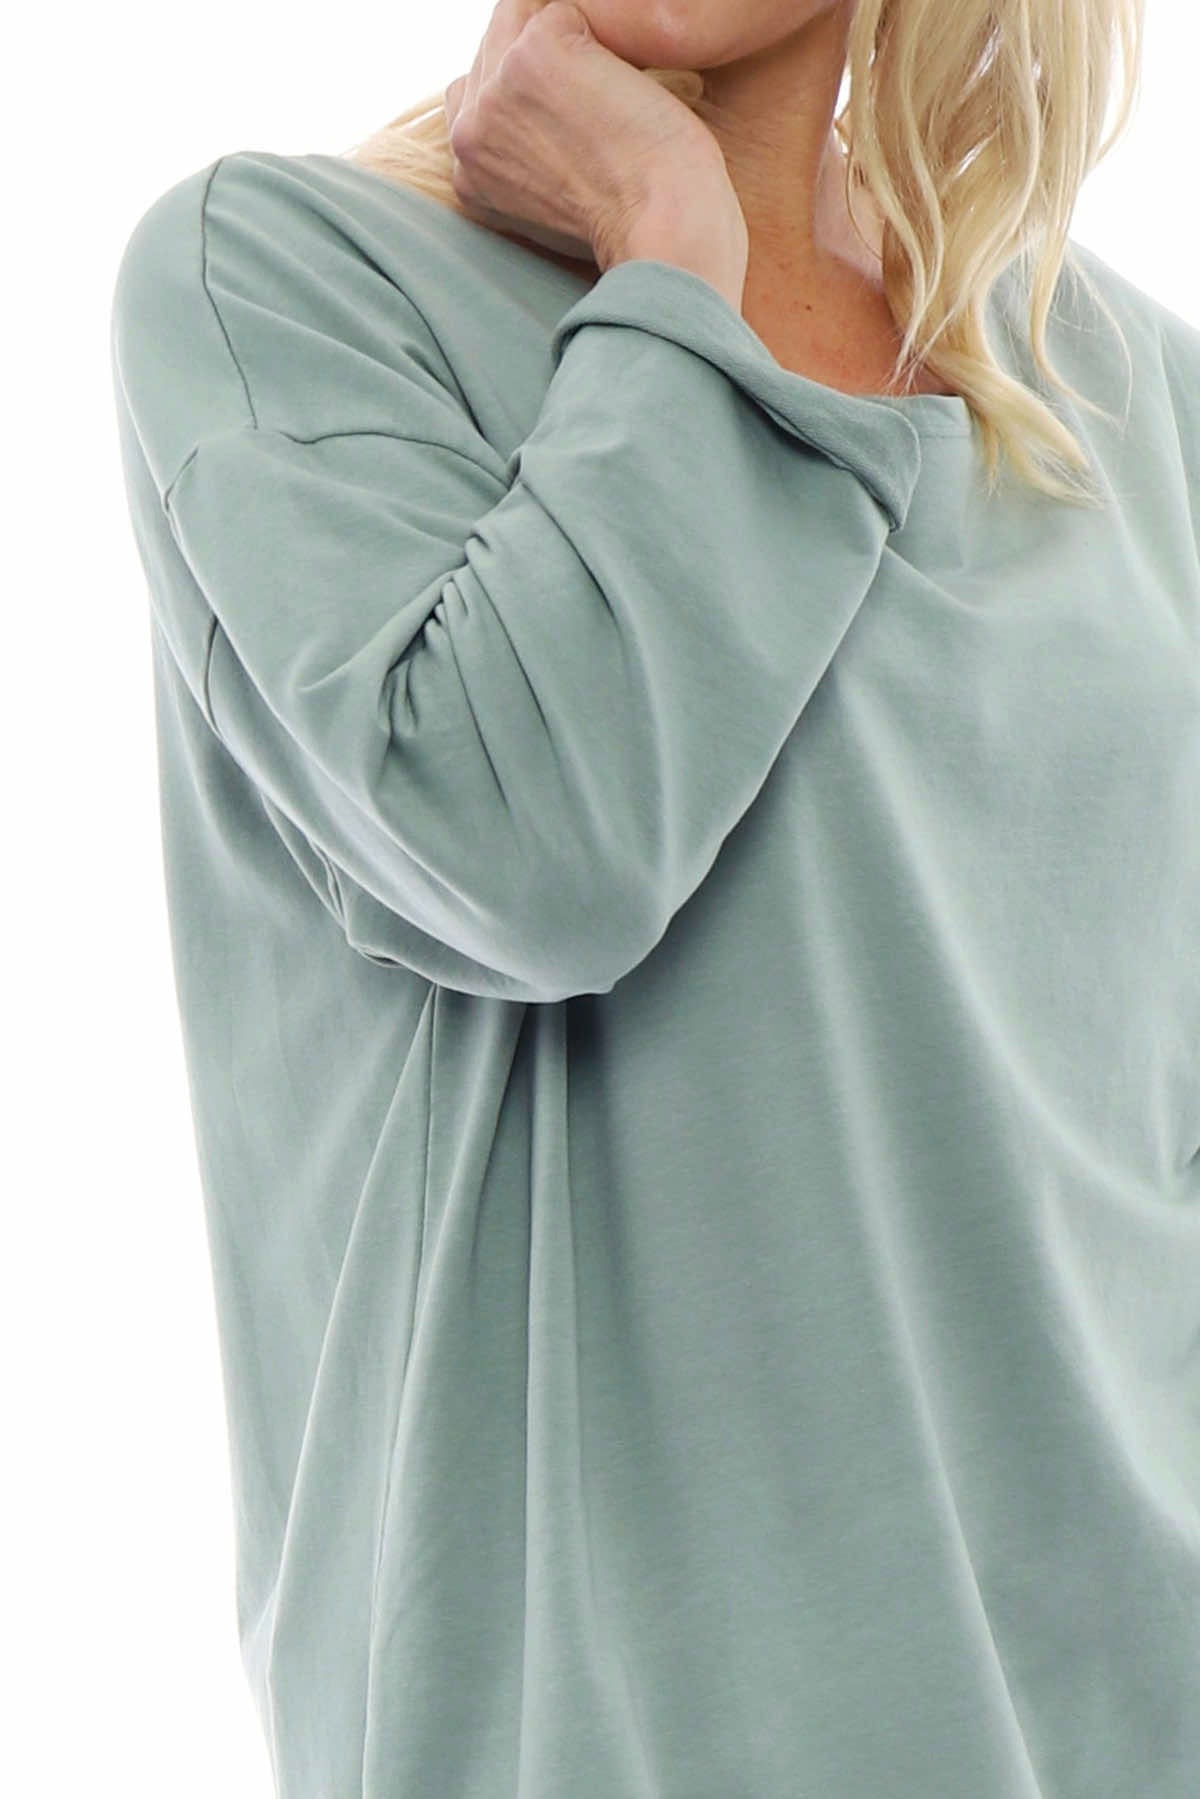 Guinevere Cotton Top Sage Green